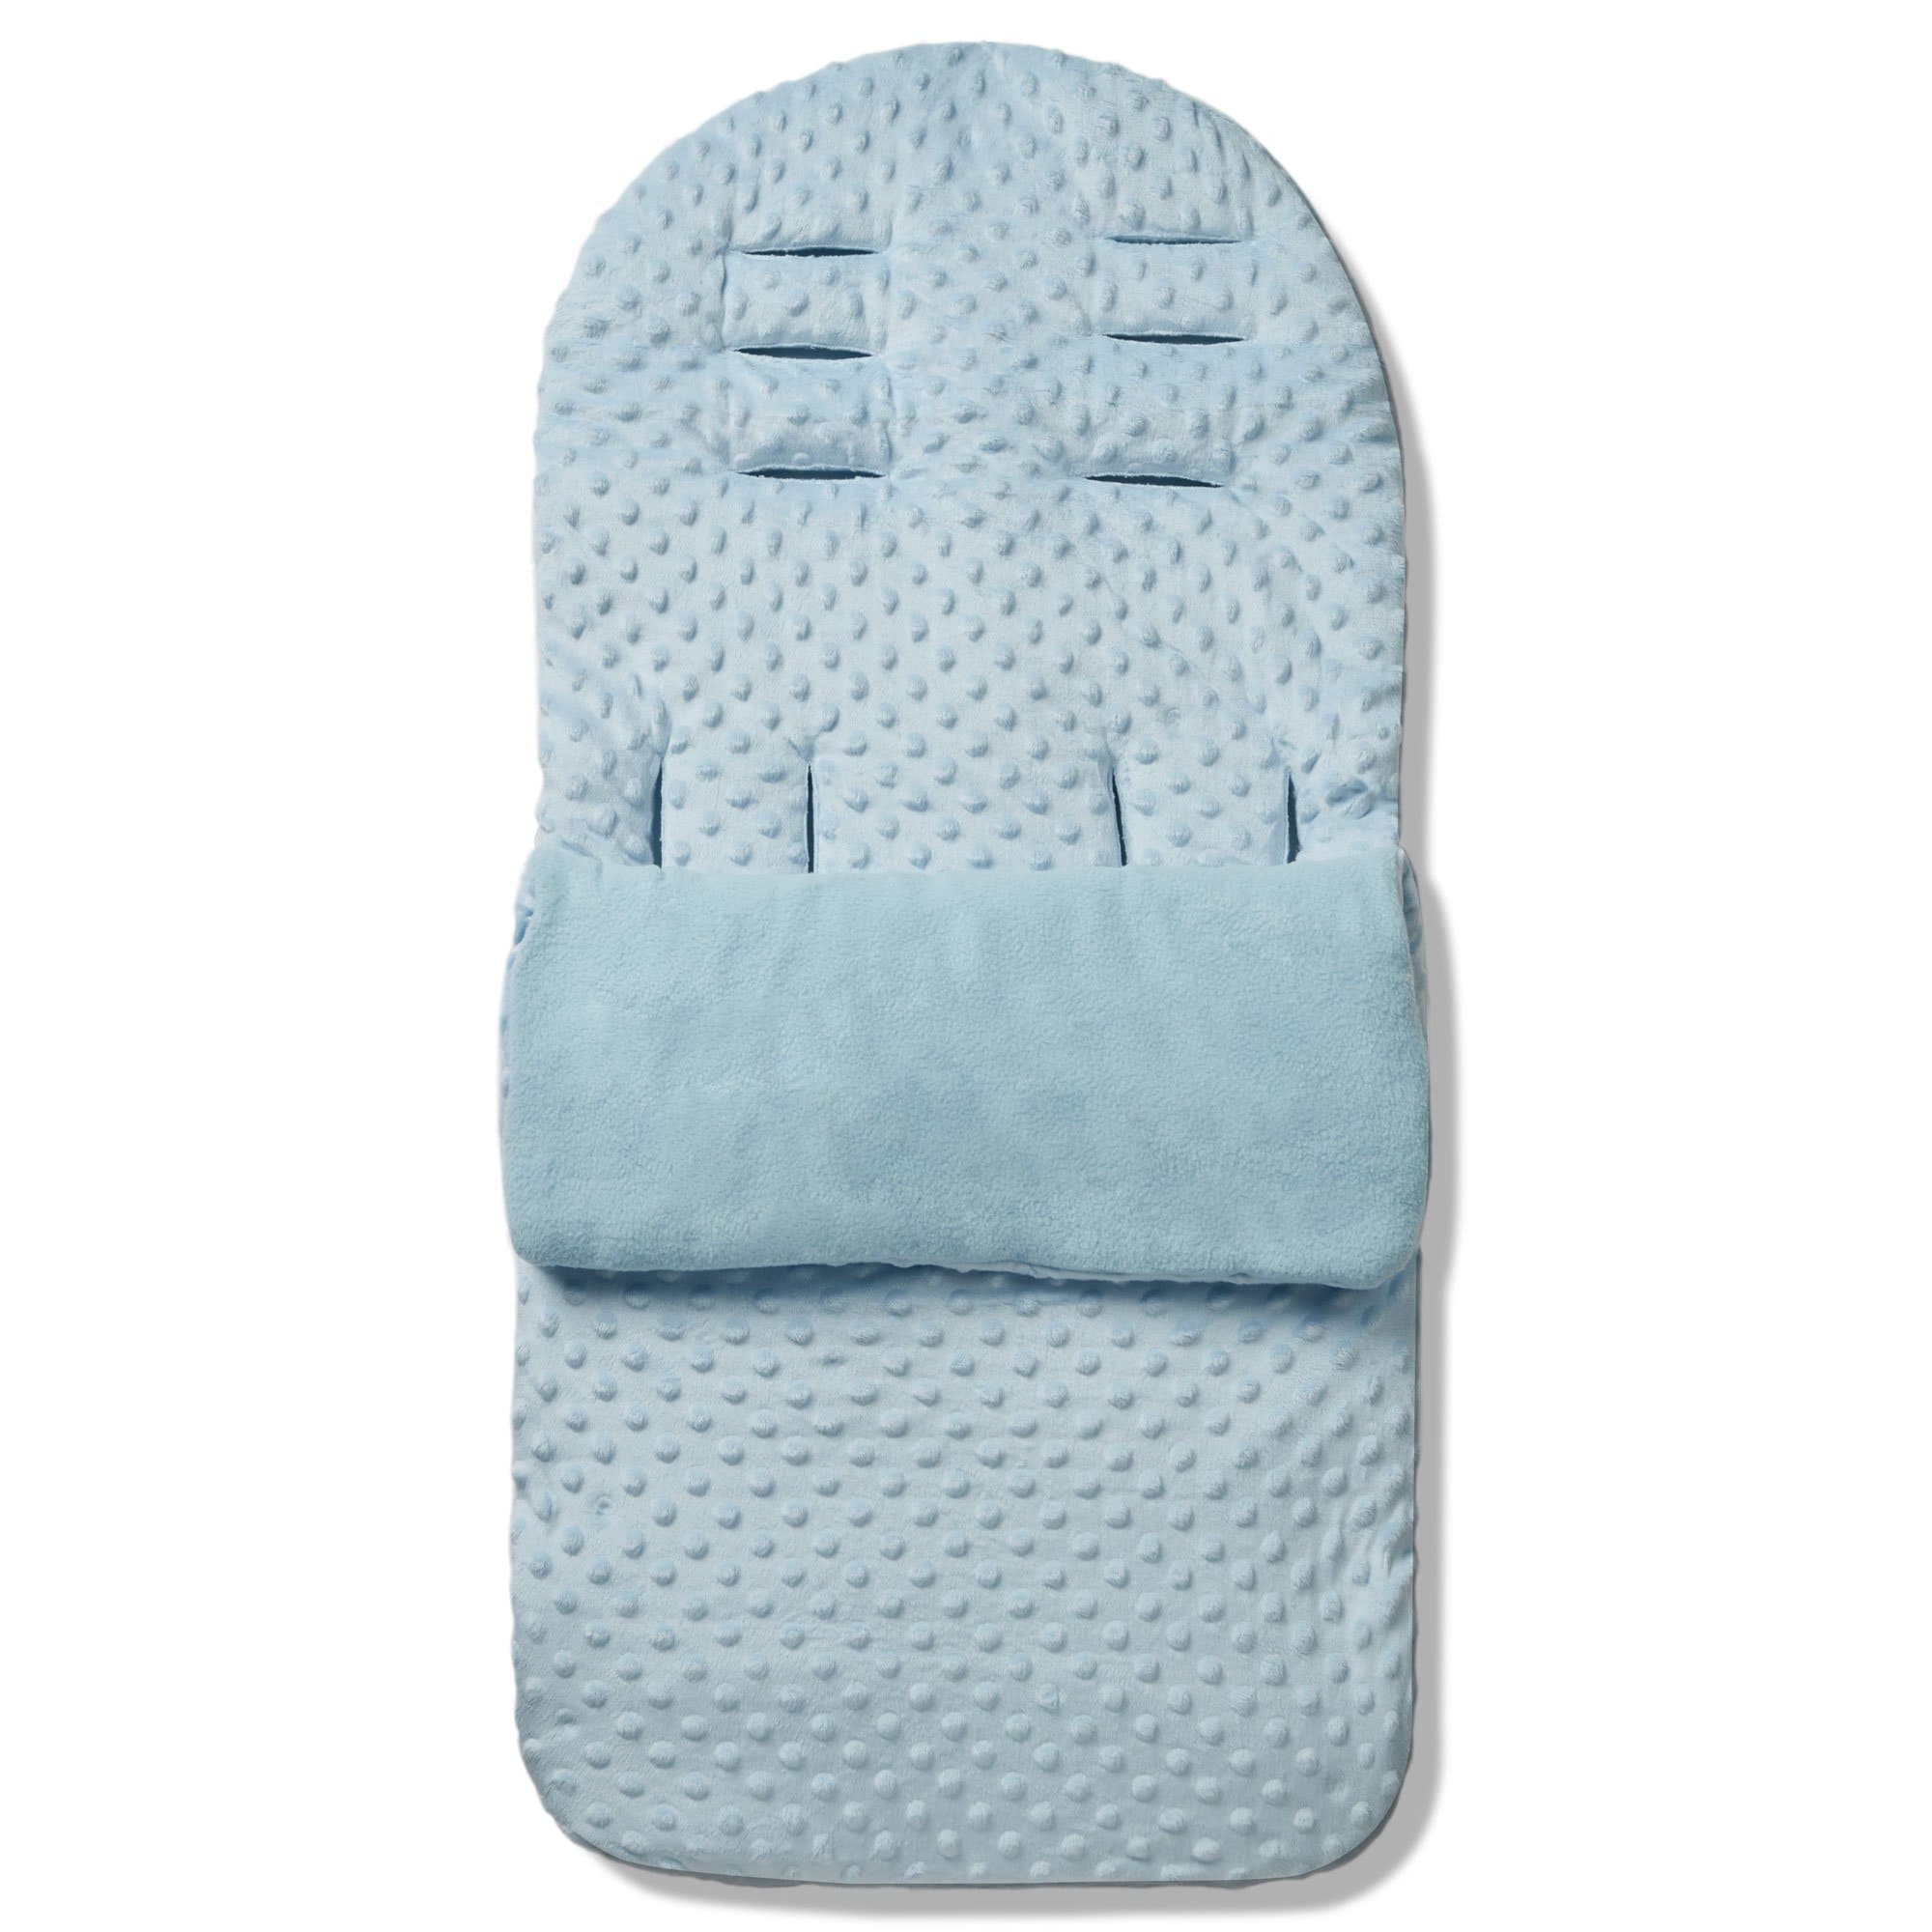 Dimple Footmuff / Cosy Toes Compatible with Babyzen - Blue / Fits All Models | For Your Little One